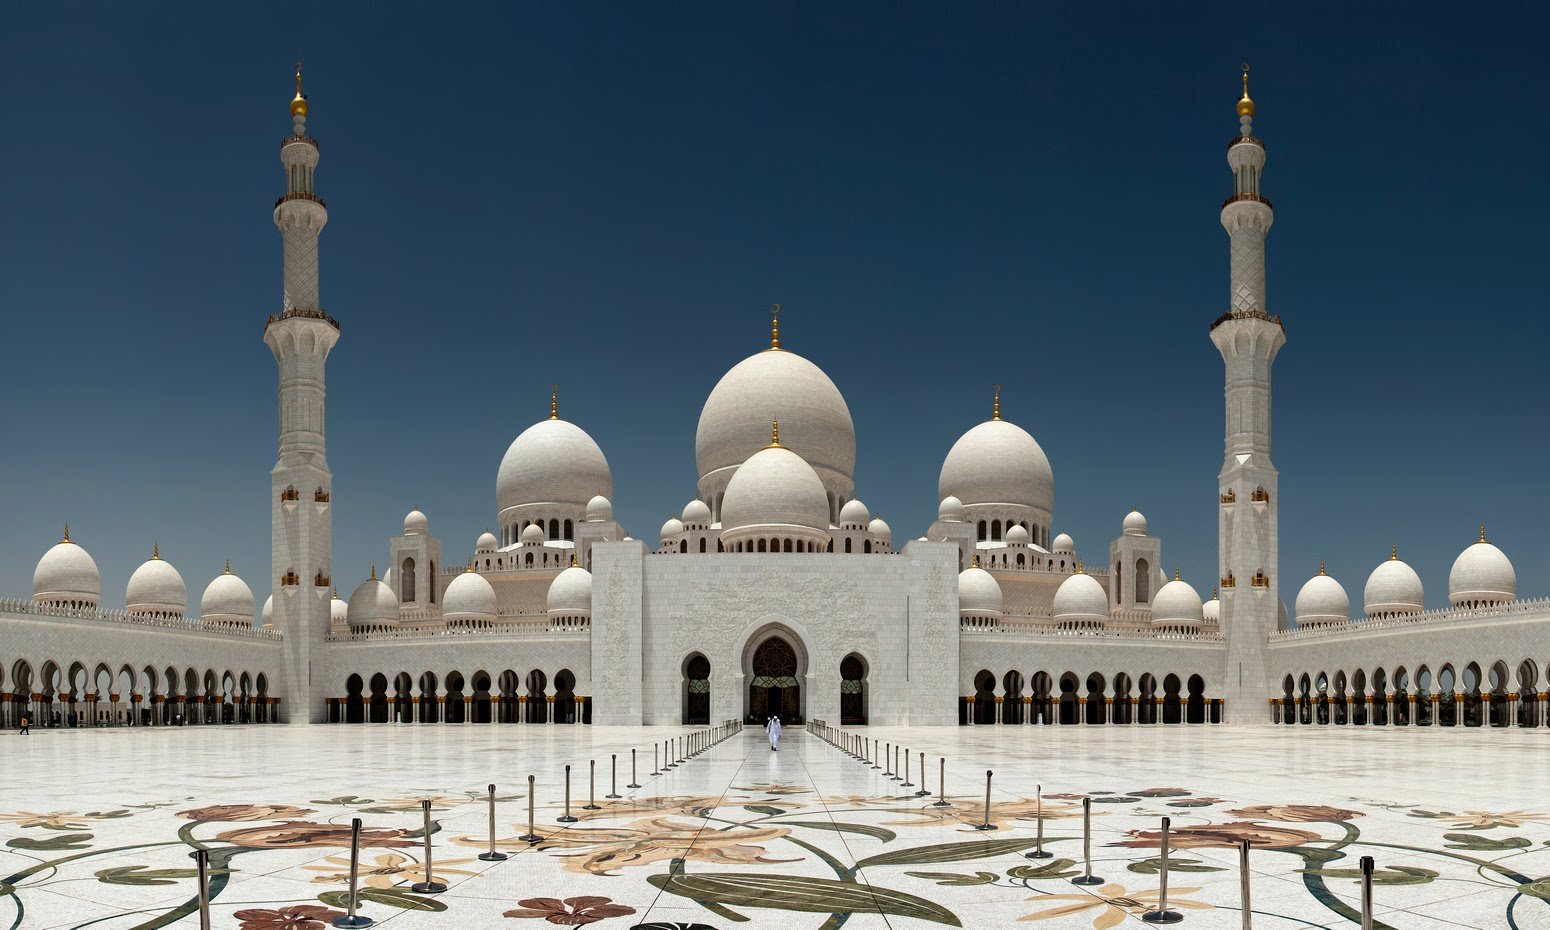 Sheikh Zayed Grand Mosque The Most Magnificent Mosques In The World